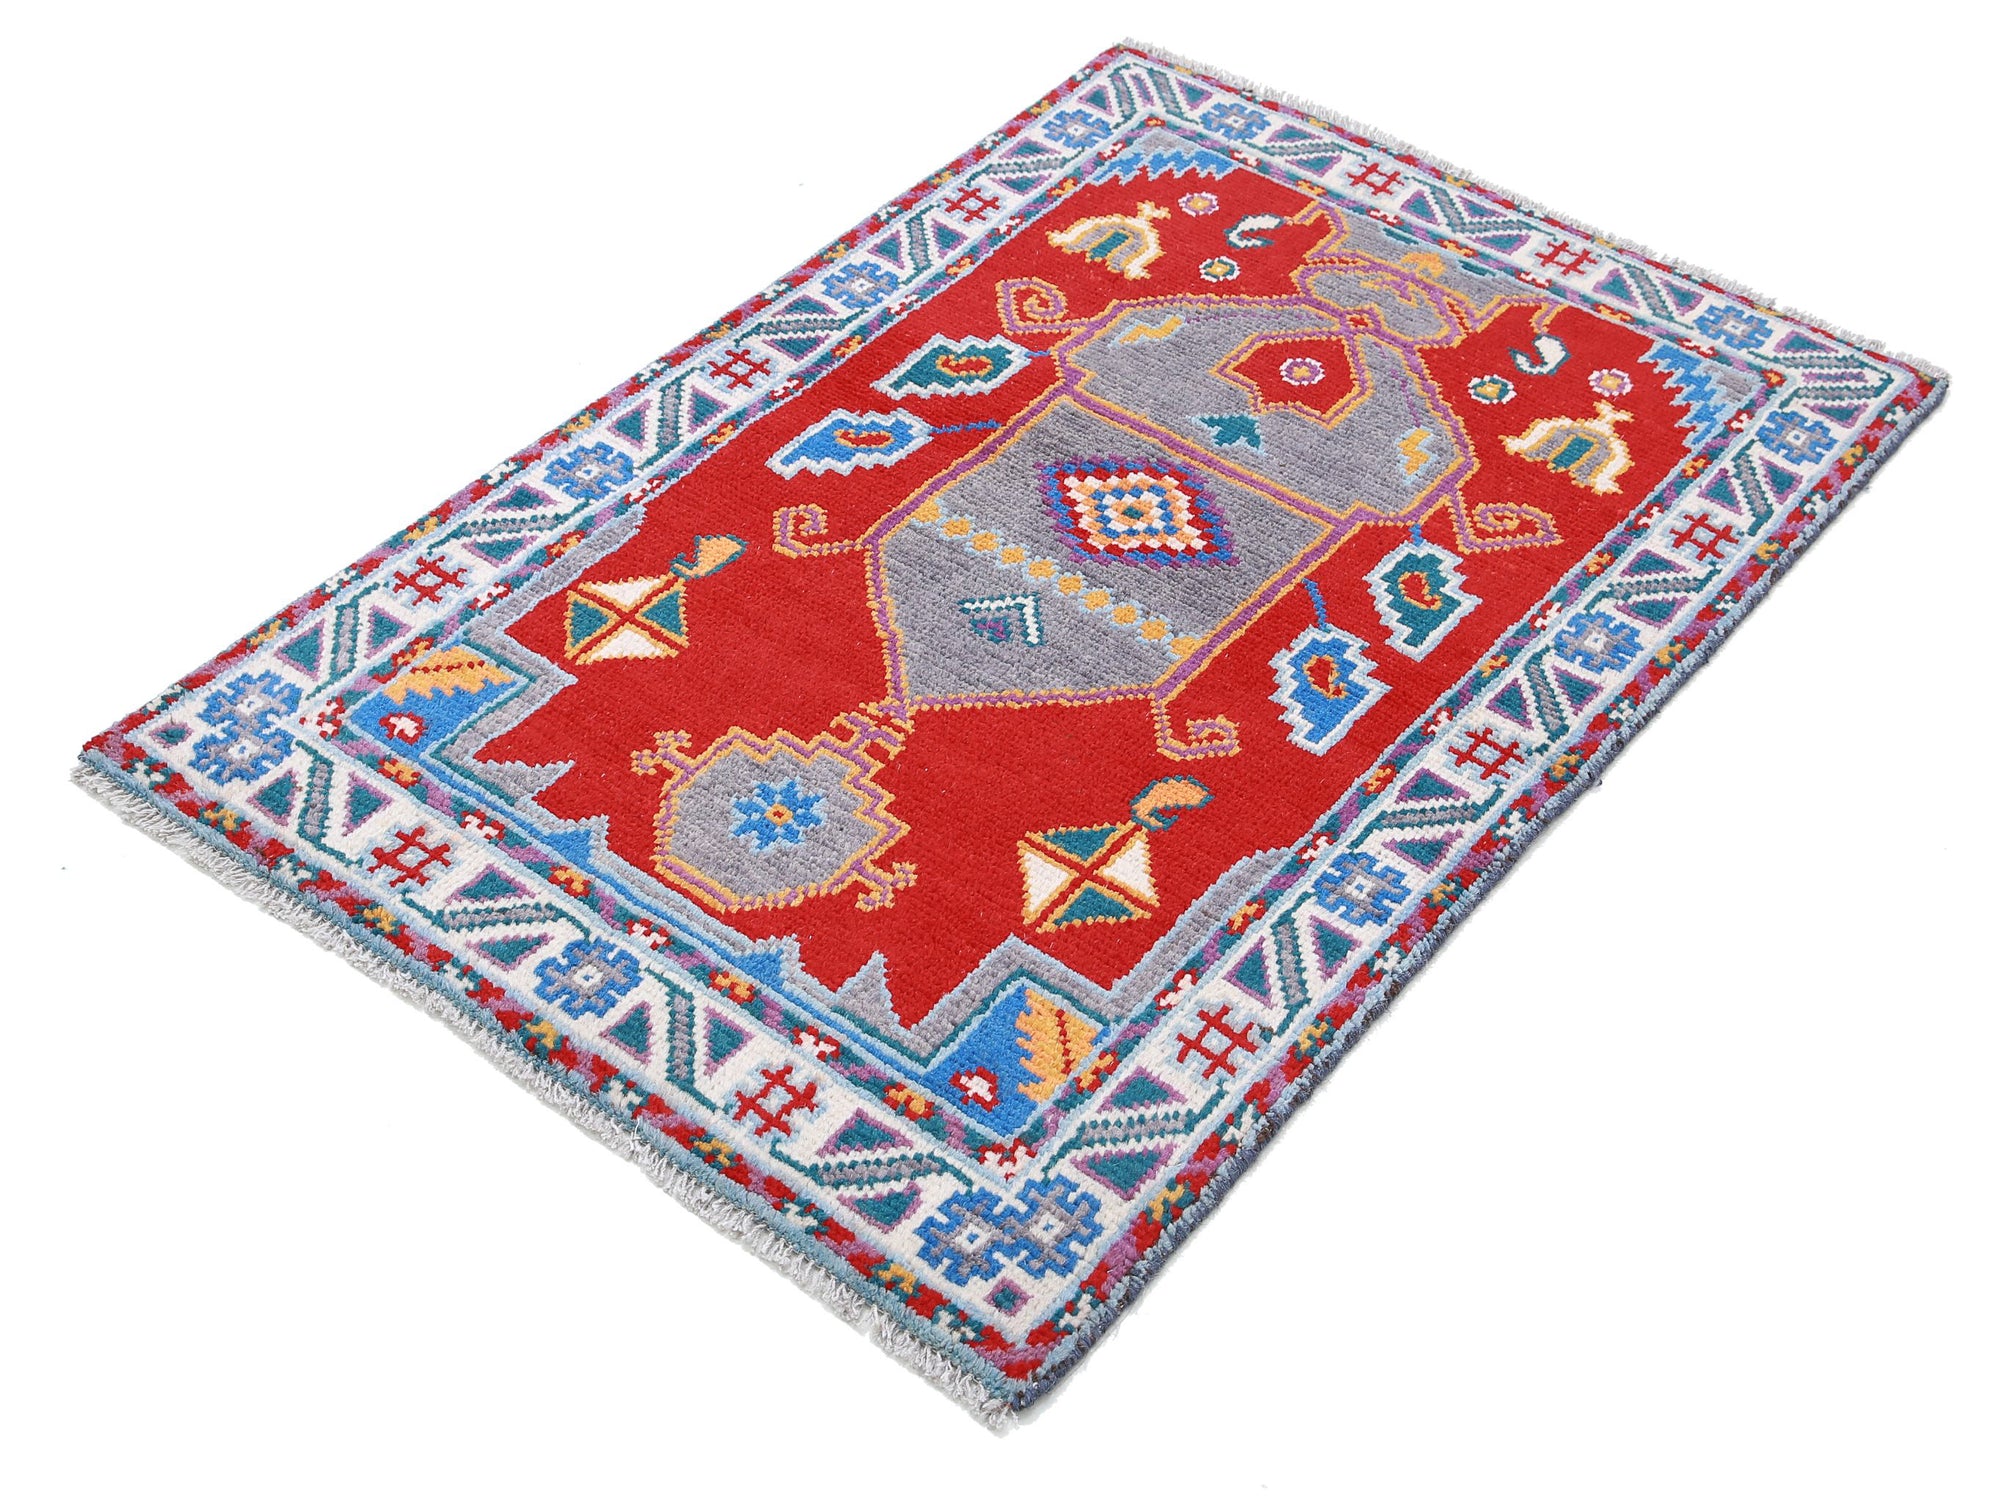 Revival-hand-knotted-qarghani-wool-rug-5014014-2.jpg